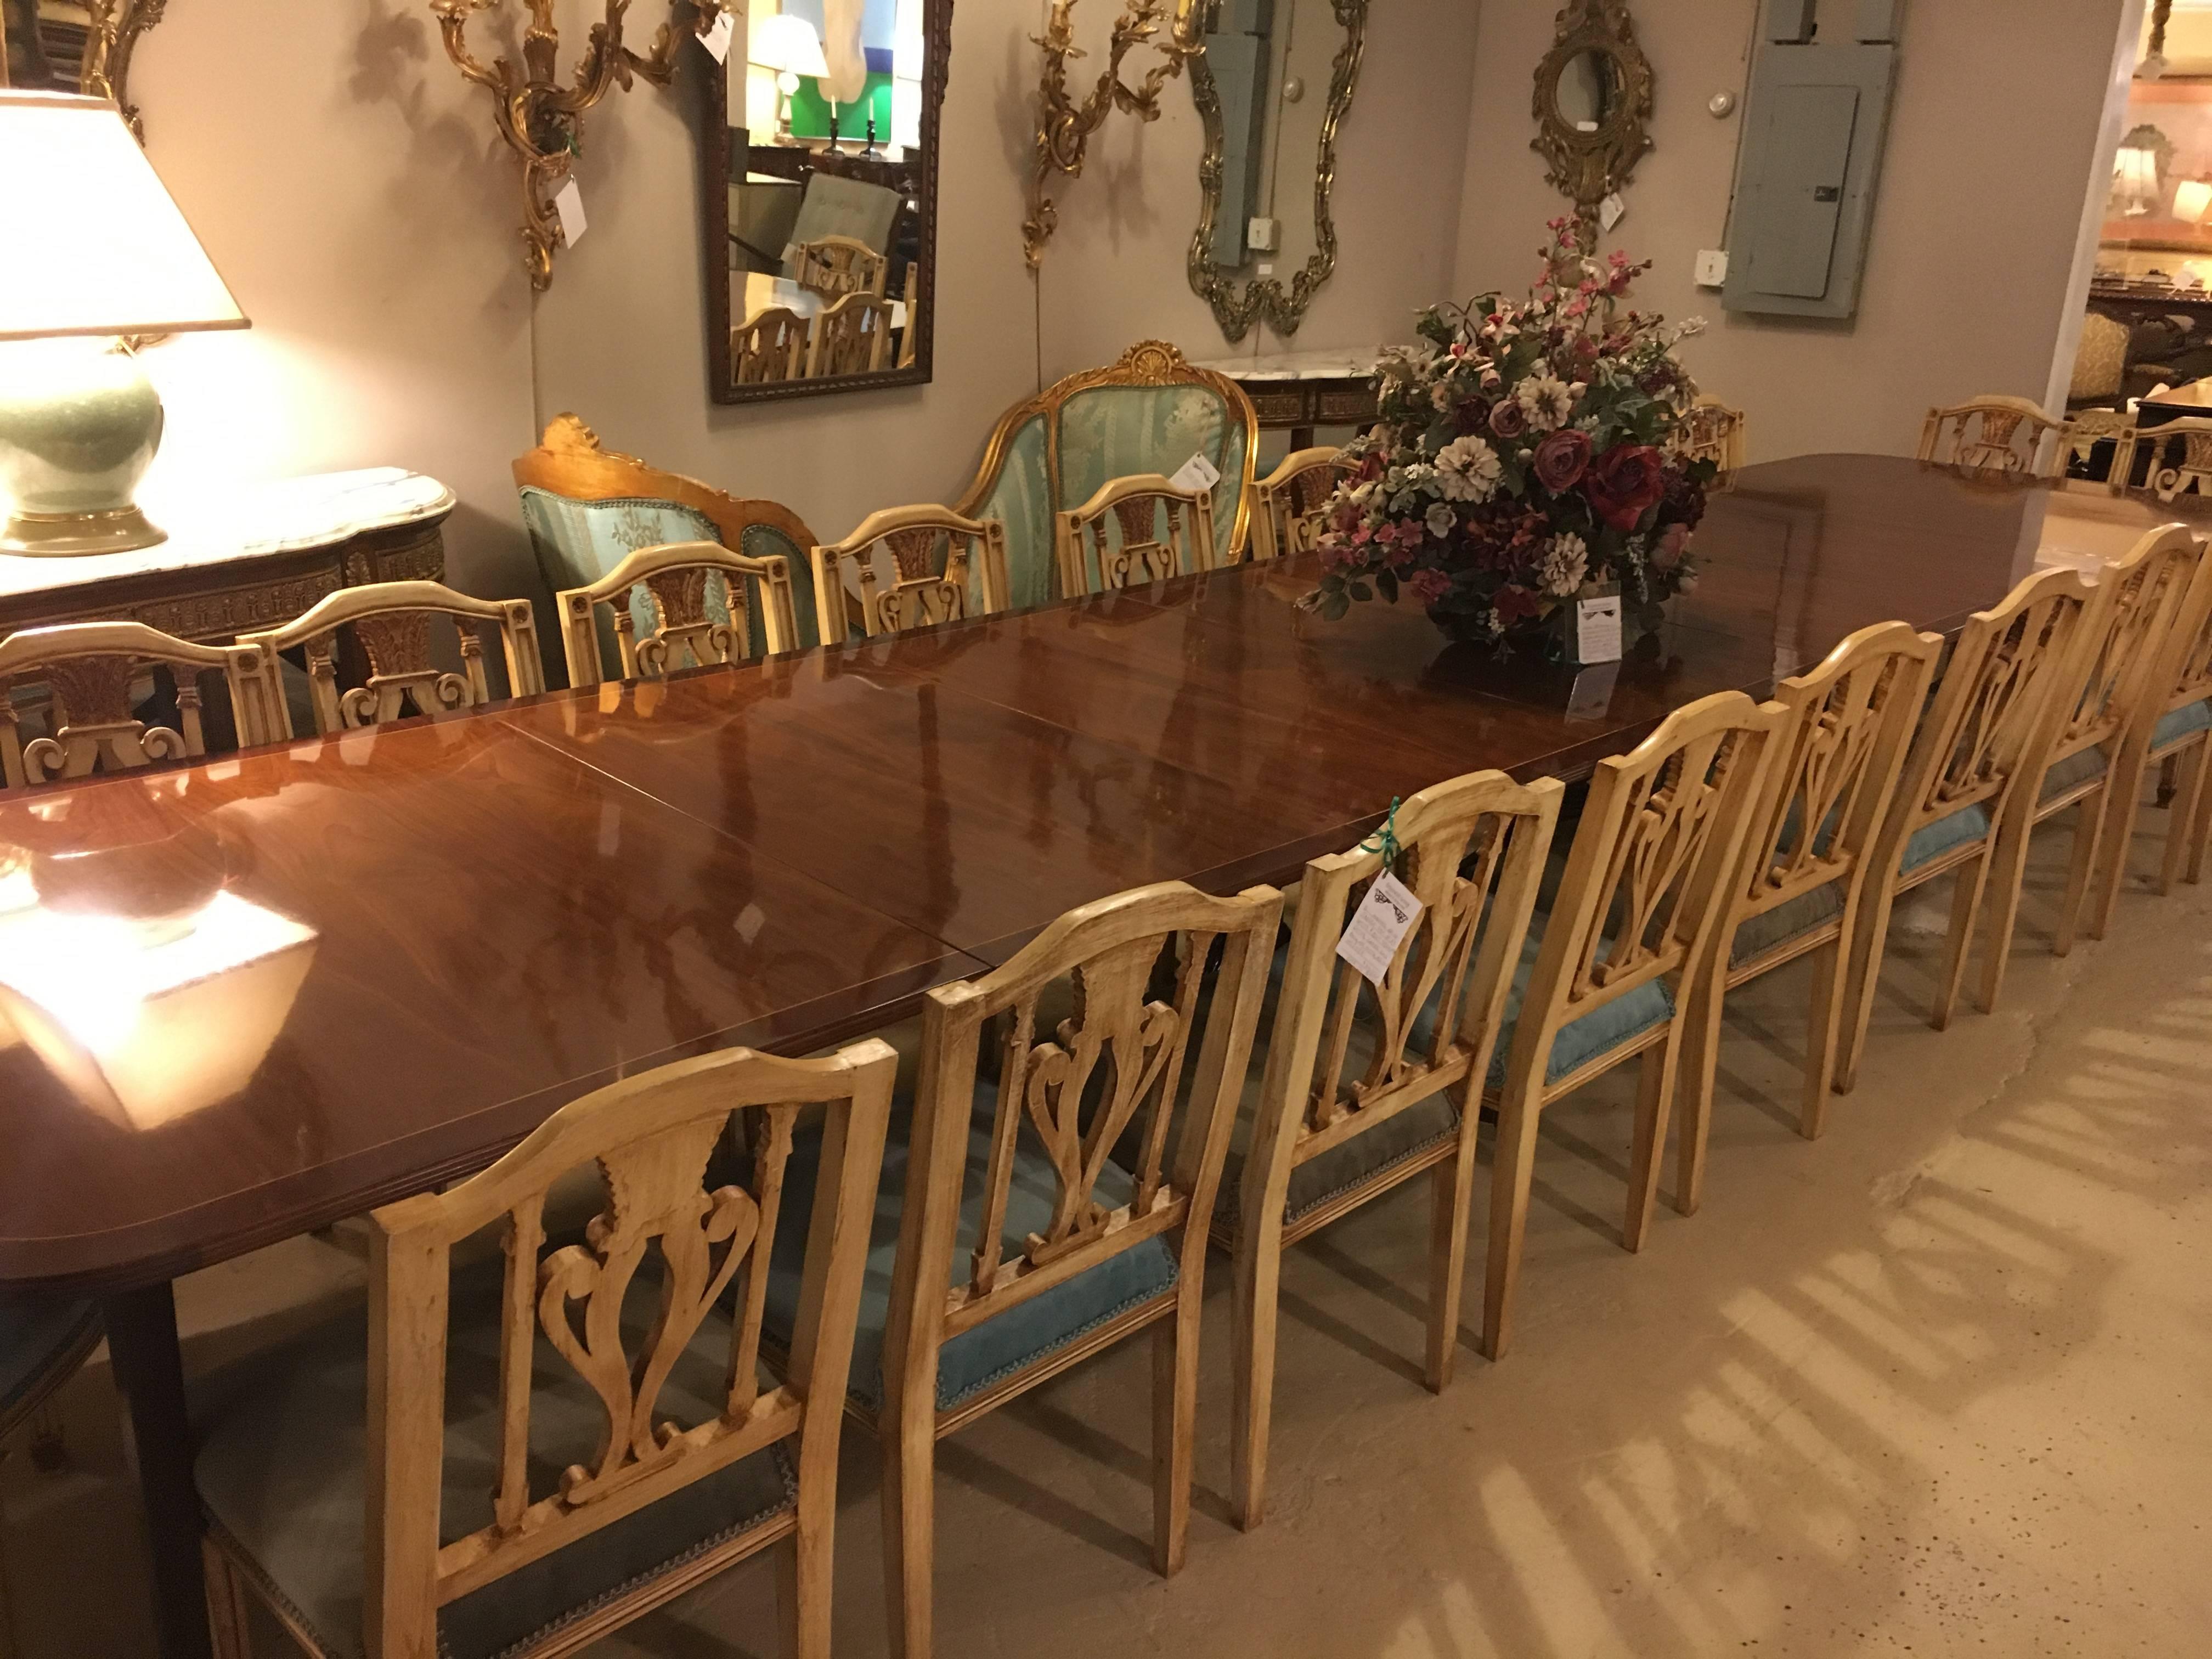 Finest monumental English Georgian style dining table sits a whooping 16+ feet and is in spectacular condition.  This one of a kind double pedestal dining table is custom crafted from fine mahogany with a wonderful rosewood banding on the outer